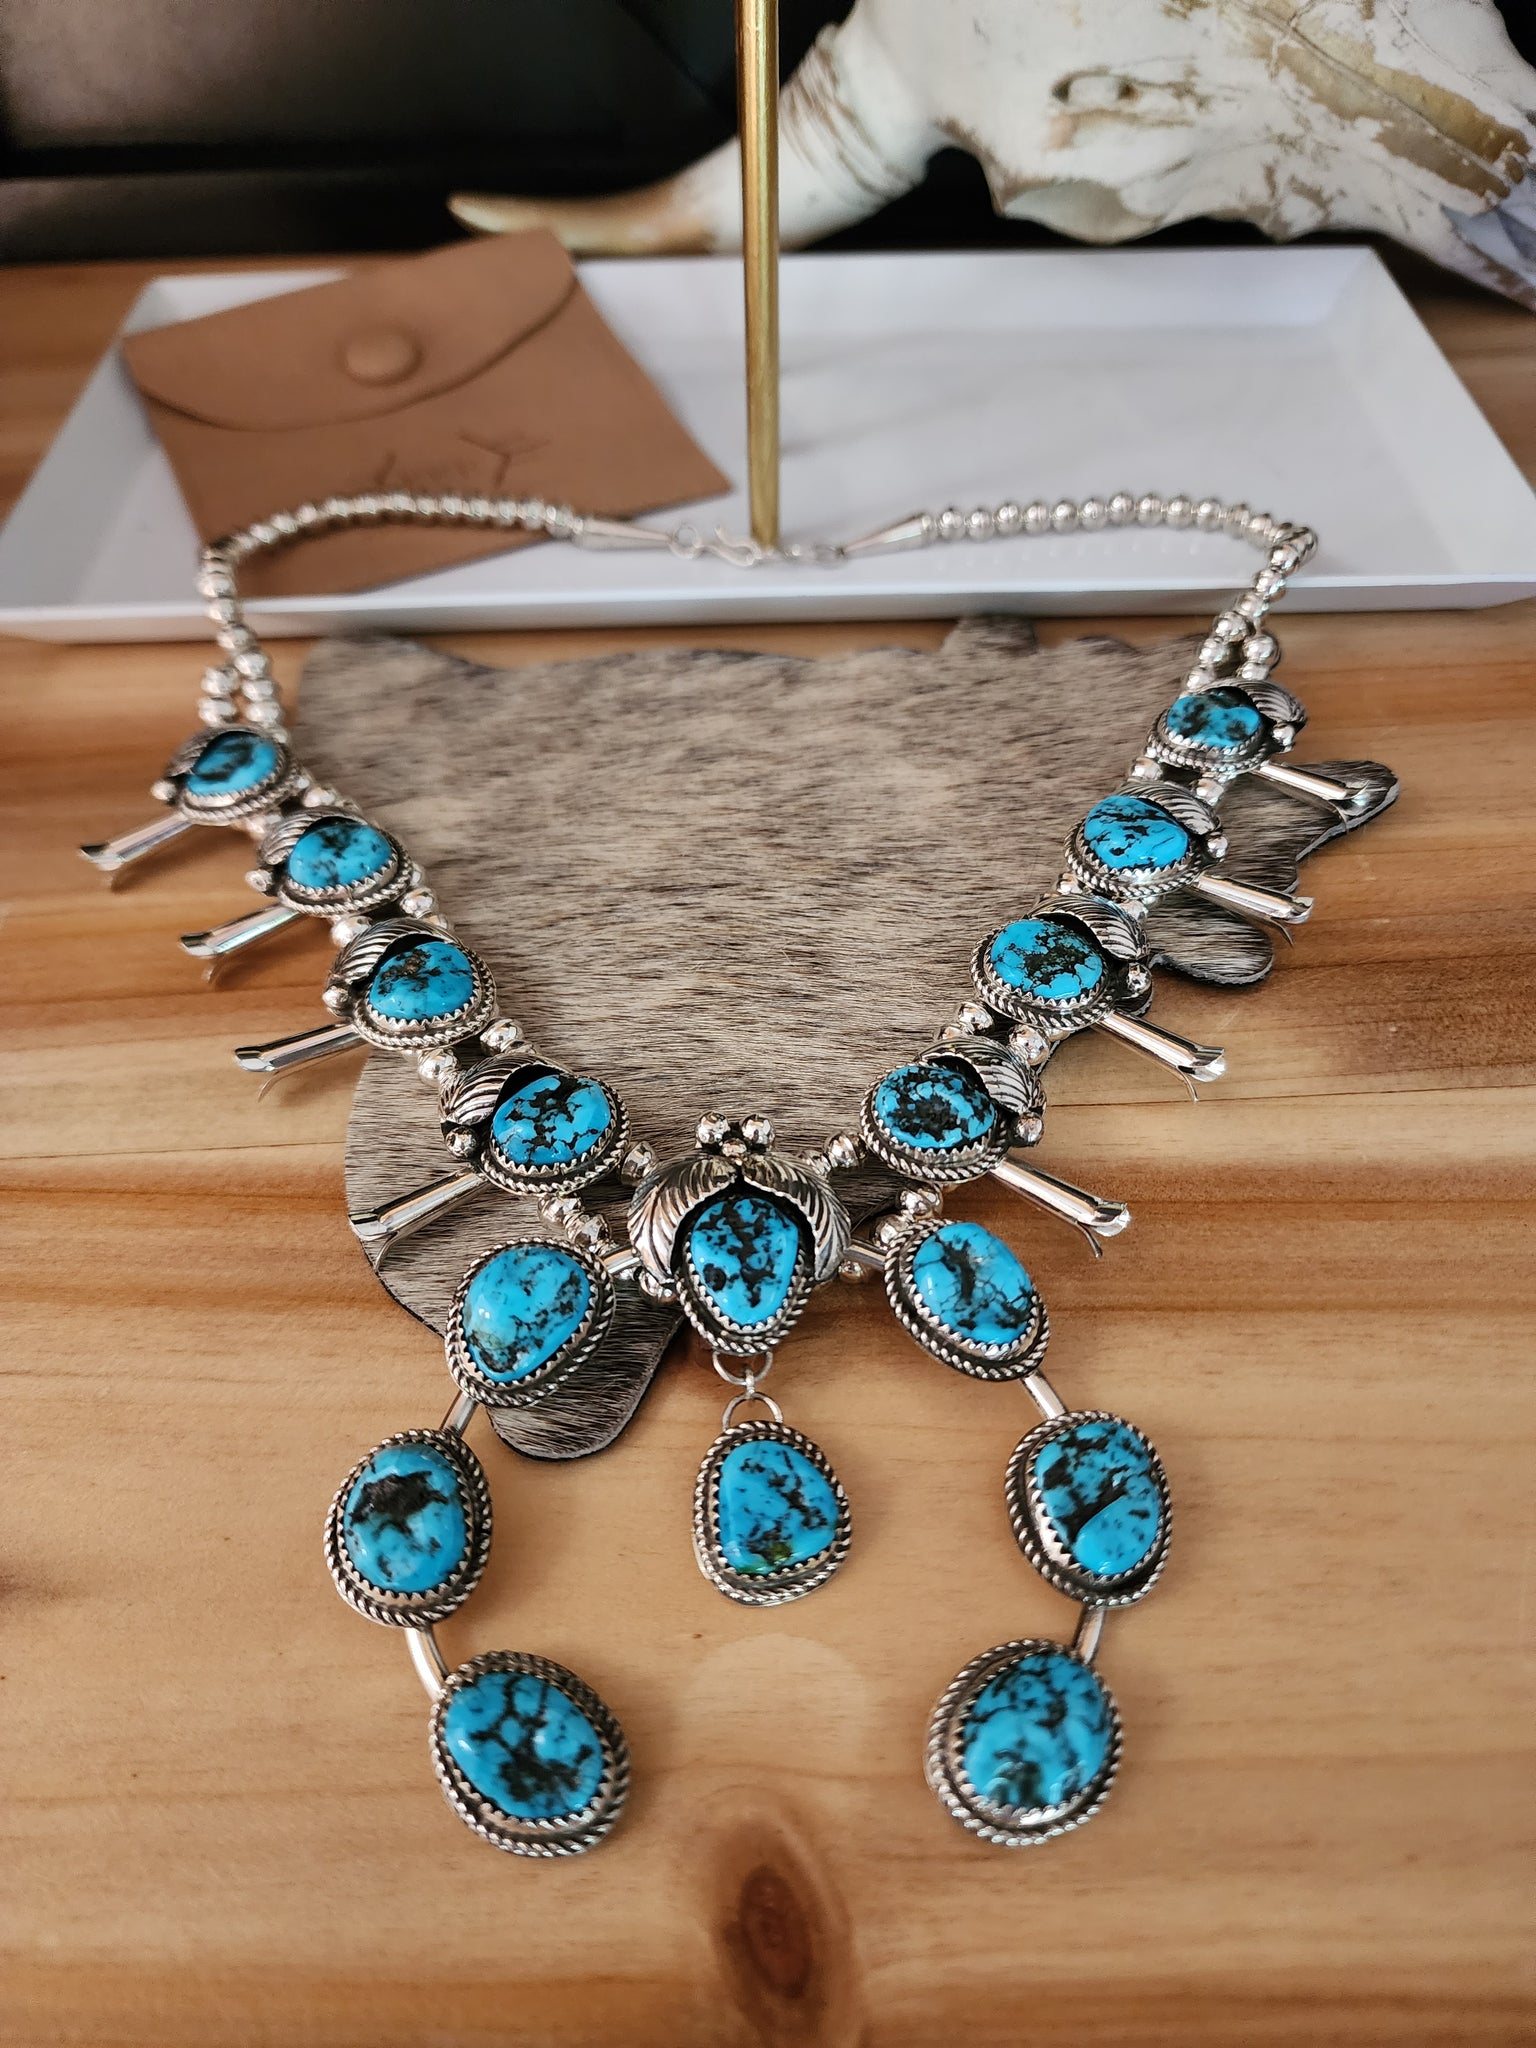 1 Squash Blossom Necklace-Adorn With Southwestern Charm